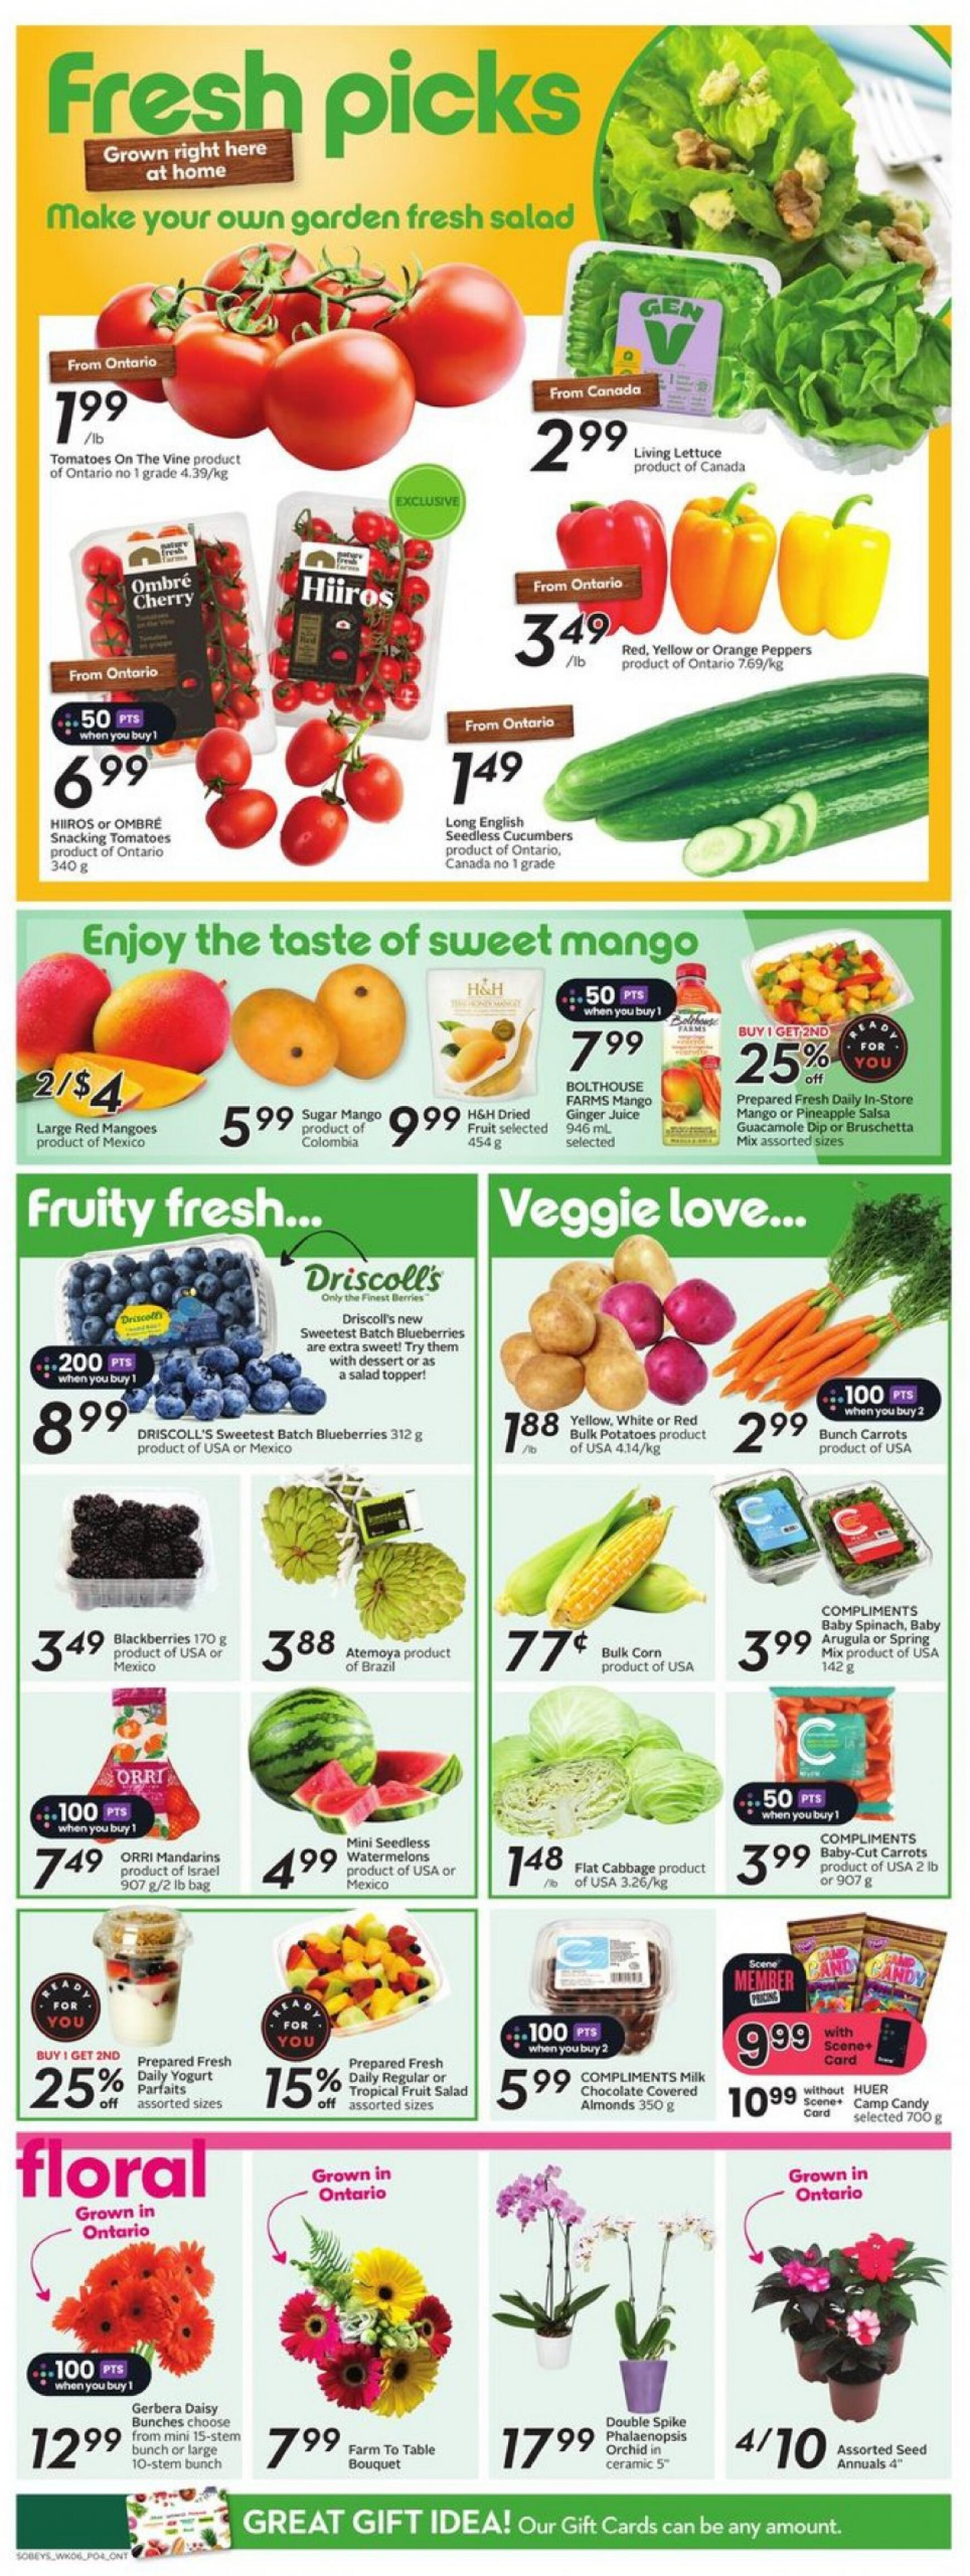 sobeys - Sobeys - Weekly Flyer - Ontario flyer current 06.06. - 12.06. - page: 8